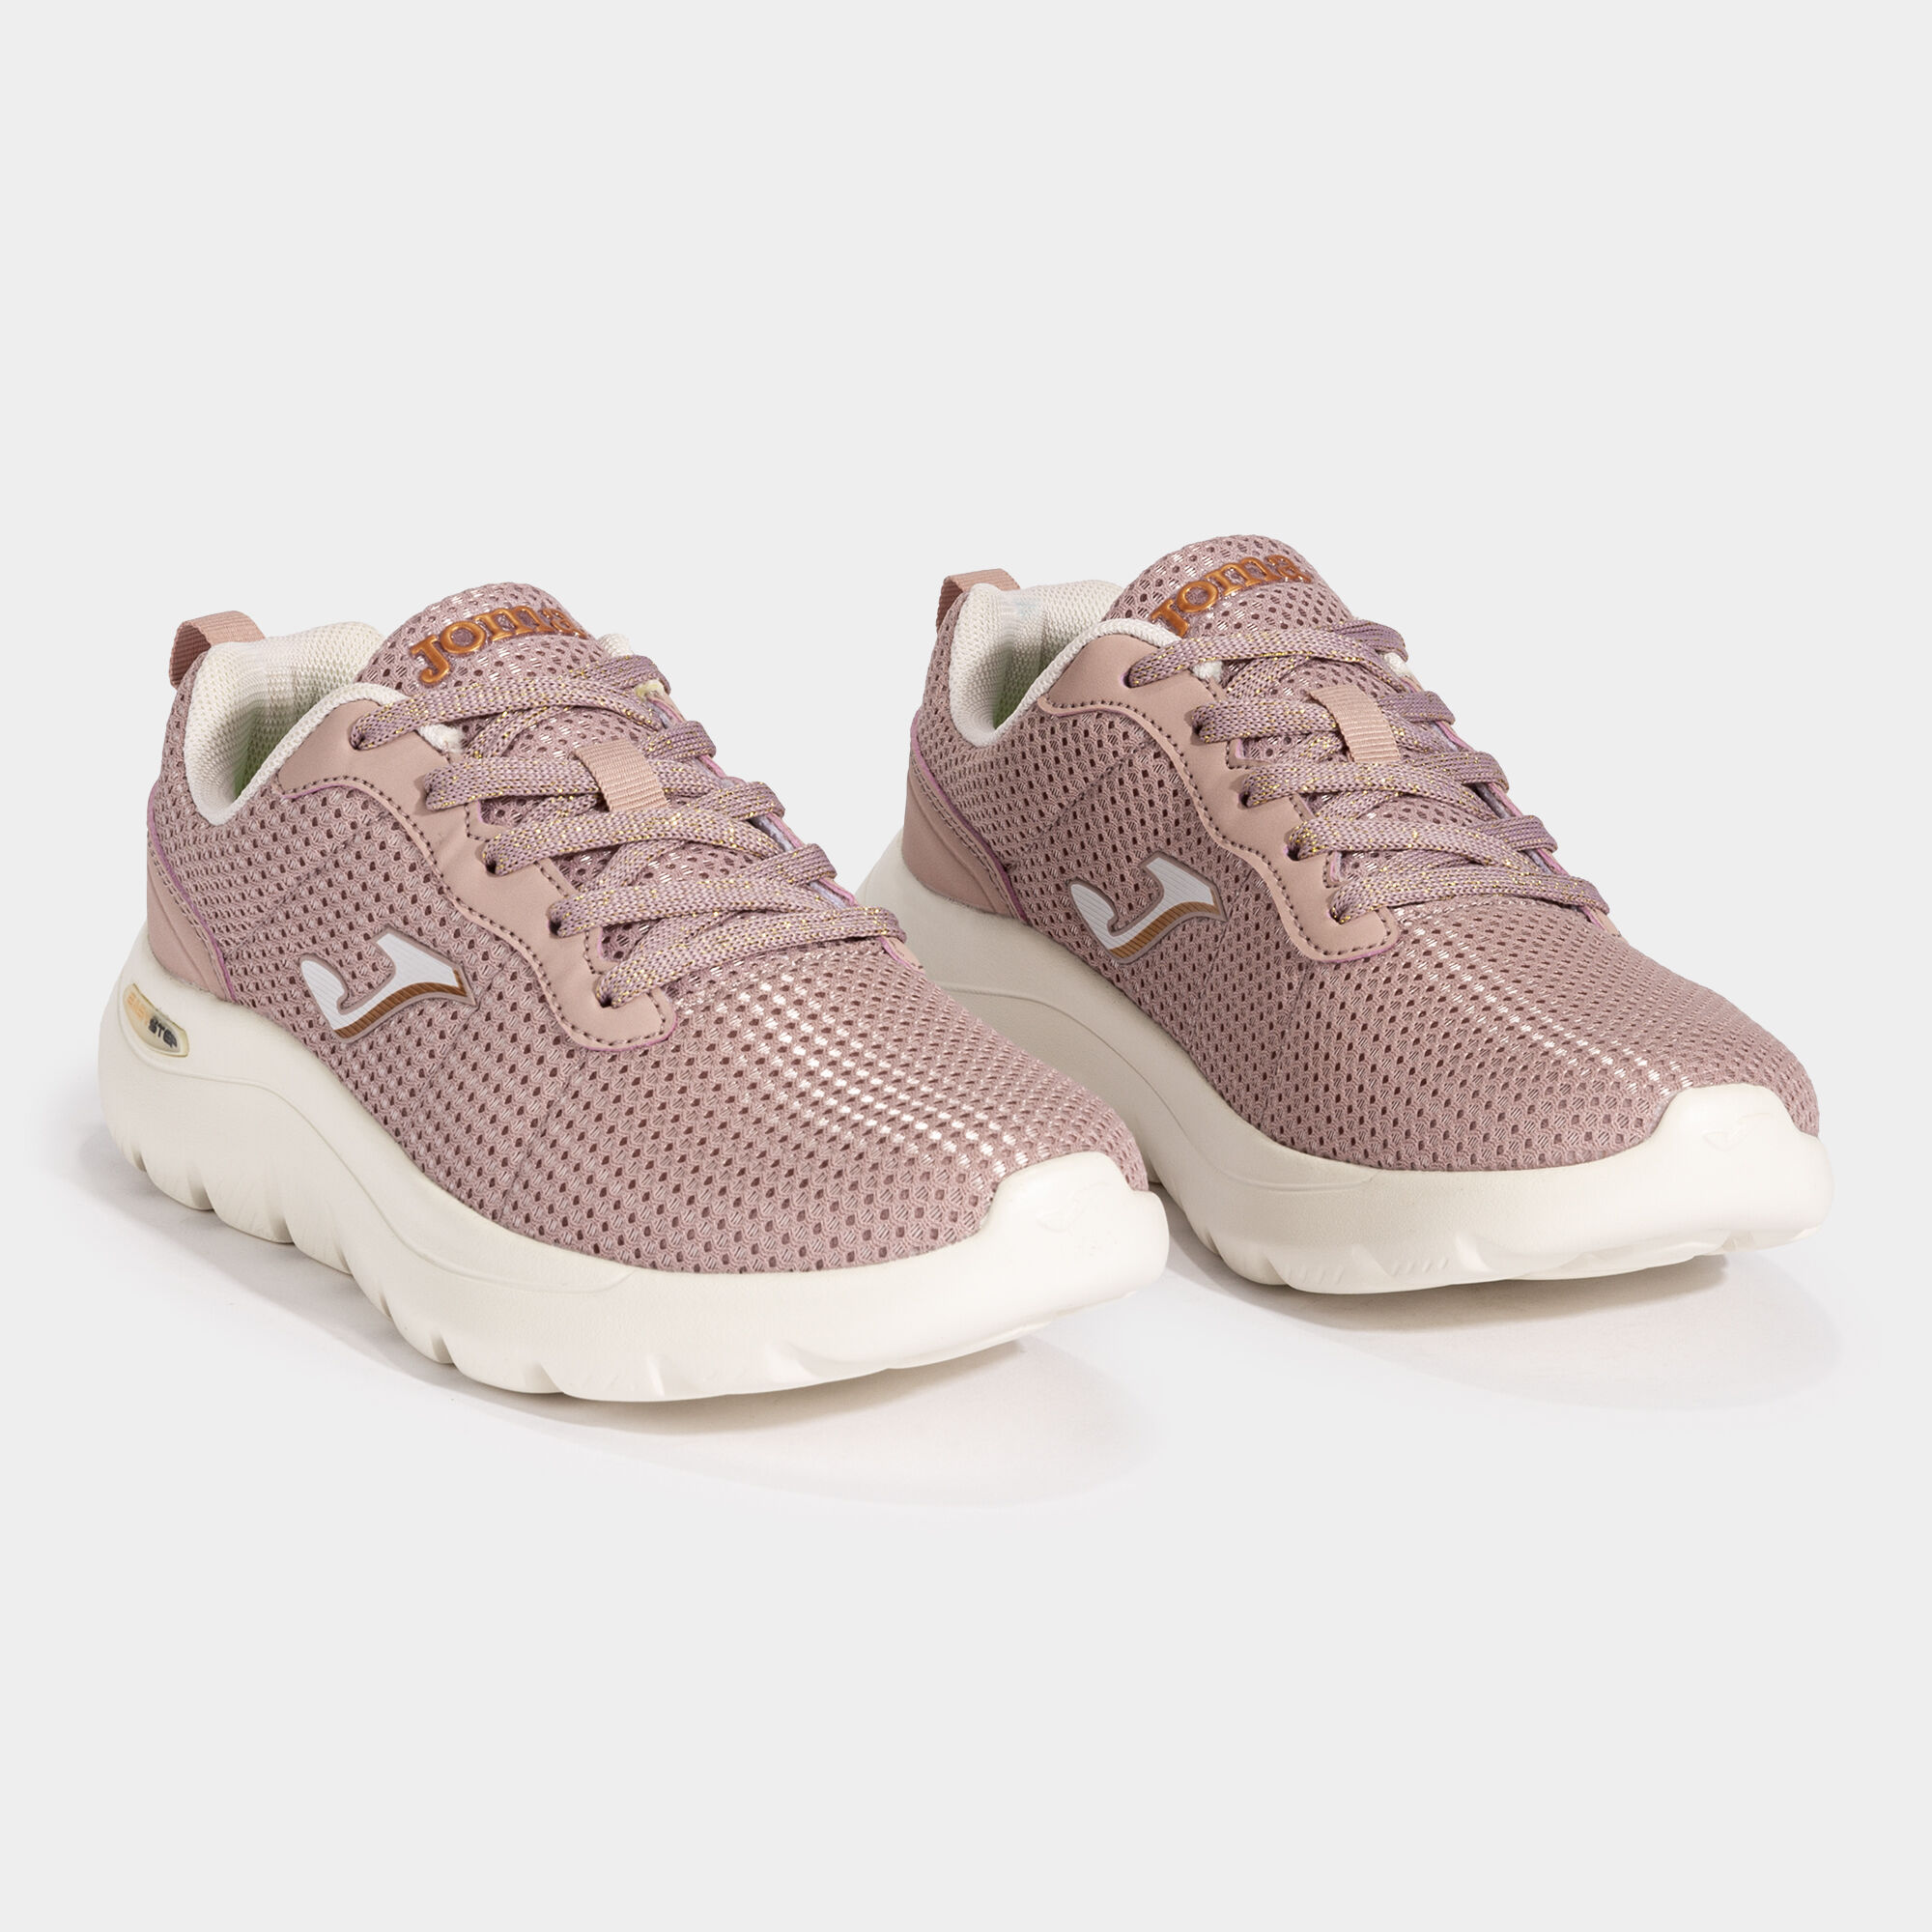 Chaussures casual C.Infinite Lady 23 femme violet